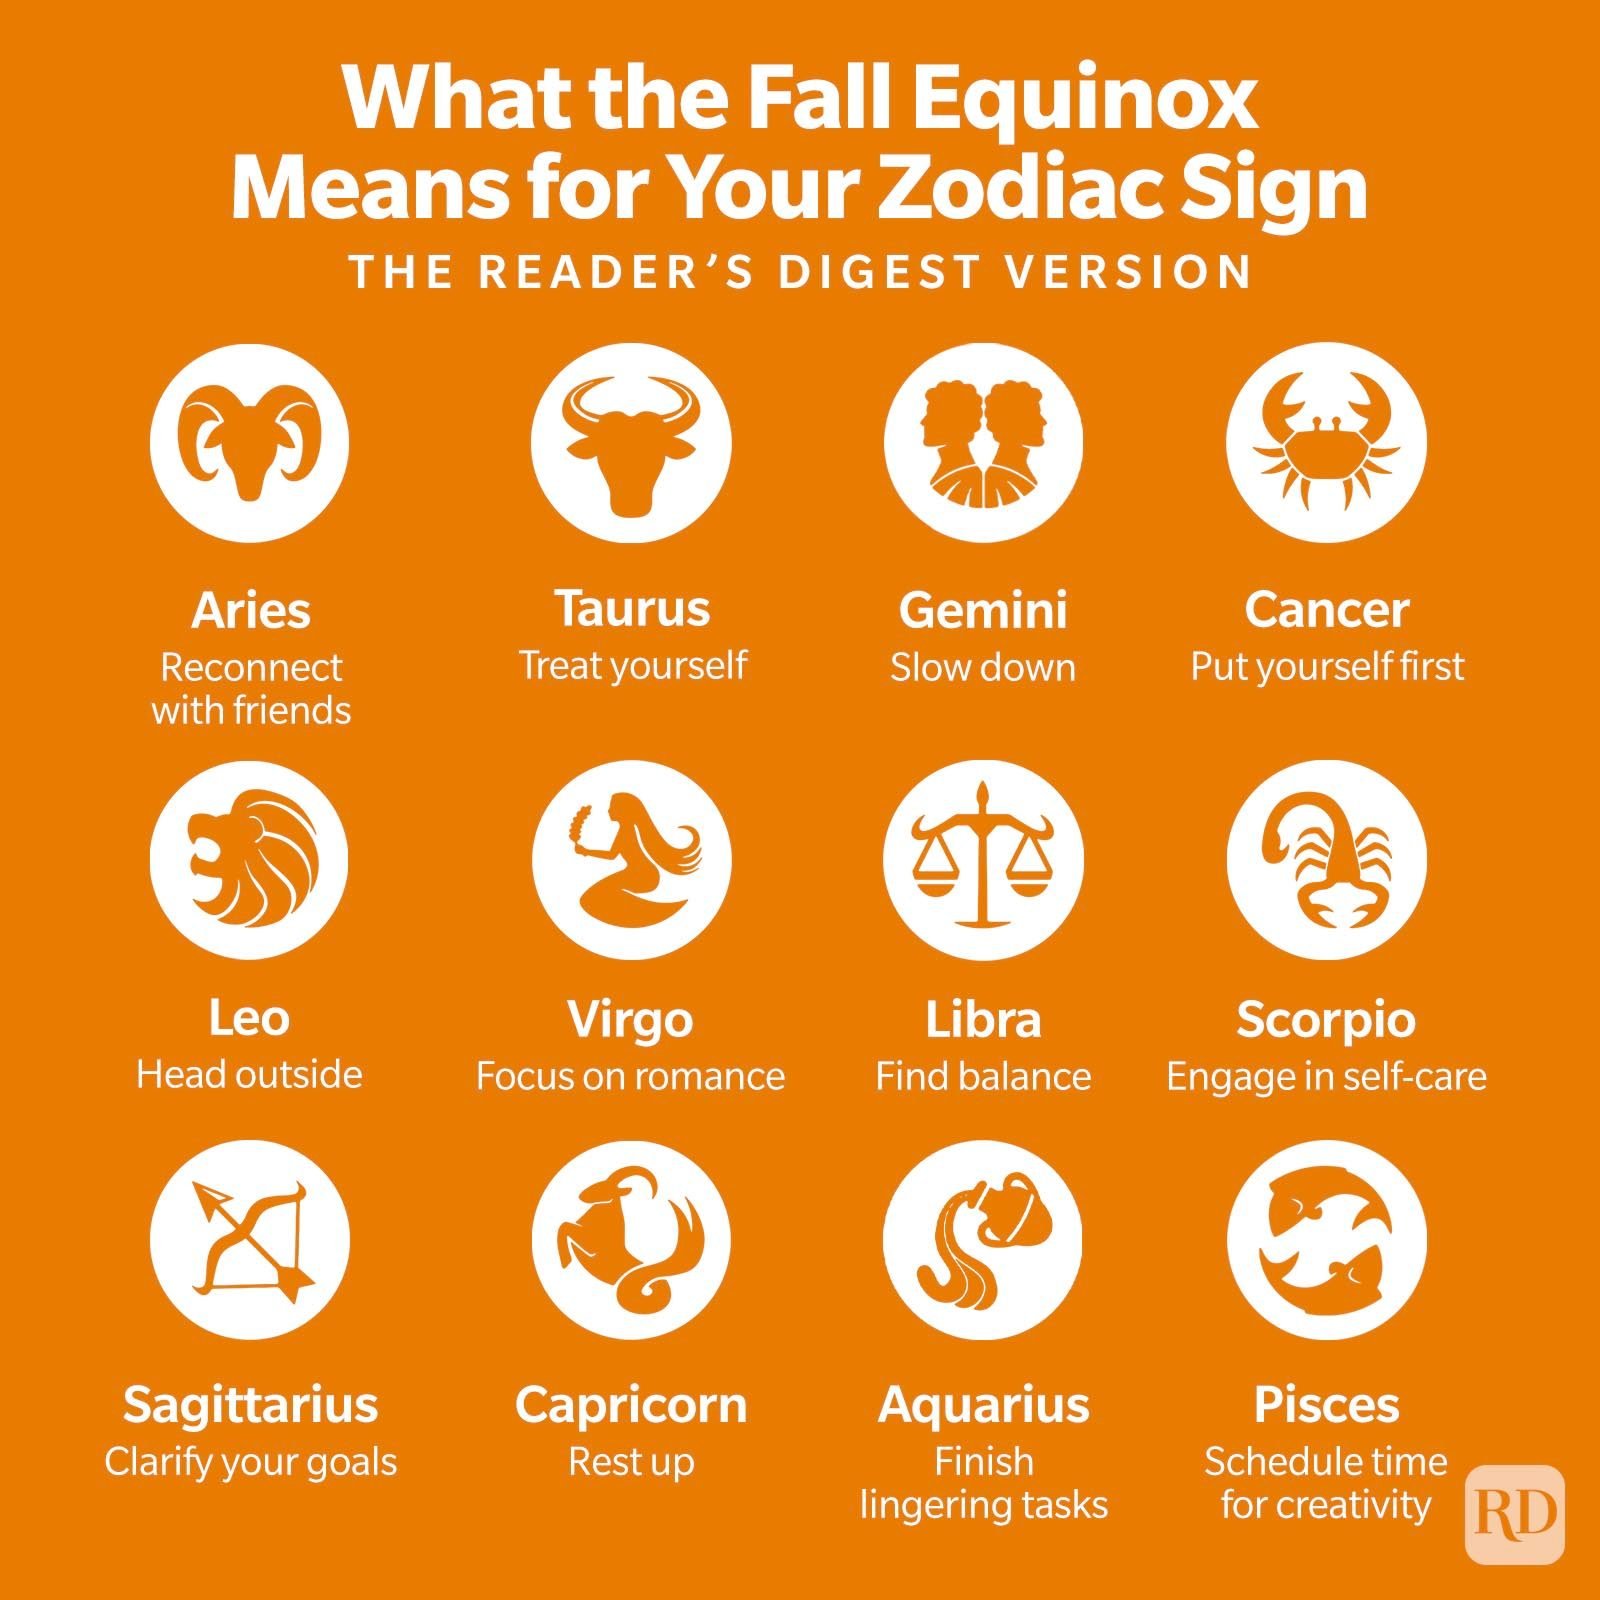 What-the-Fall-Equinox-Means-For-Your-Zodiac-Sign-Graphic.jpg